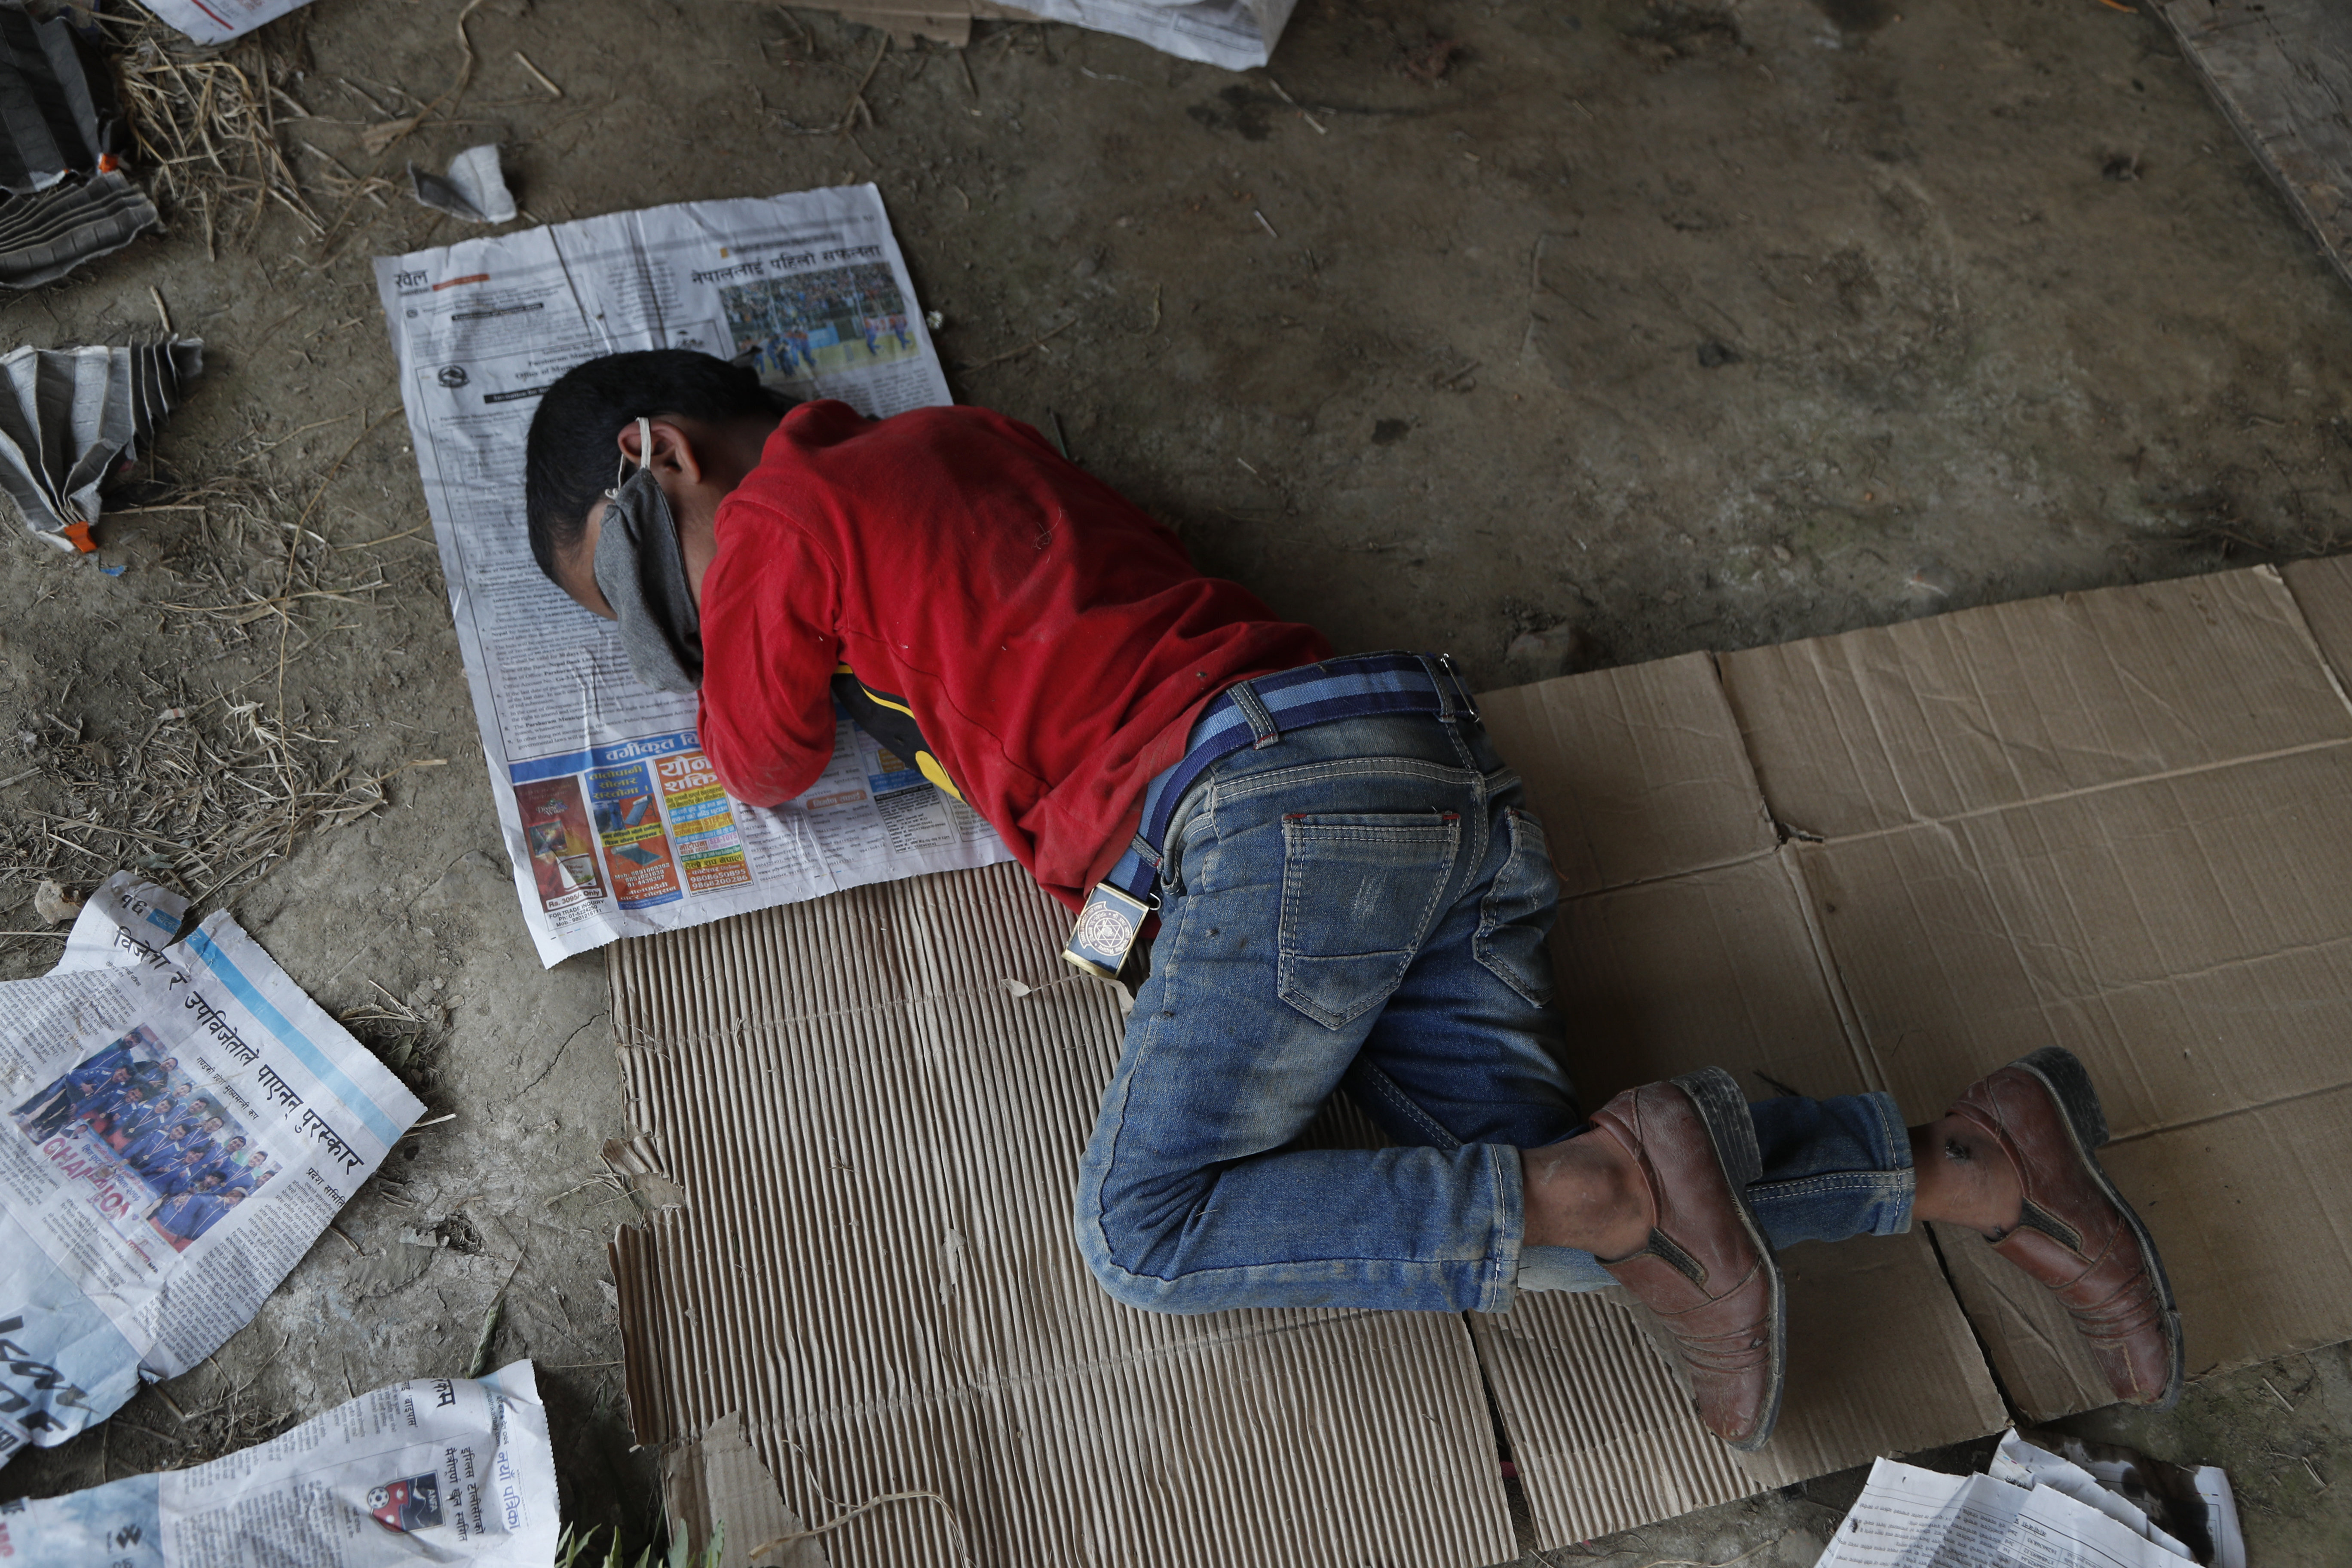 The son of a Nepalese daily wage worker sleeps at a makeshift shelter after being stopped by policemen while they were on their way to their village, during lockdown to prevent the spread of the new coronavirus in Lubu, on the outskirts of Lalitpur, Nepal, Saturday, April 18, 2020. The supreme court passed an interim order on Friday instructing the Nepalese government to ensure free transportation for stranded daily wage workers and others making the long journey back to their respective villages on foot. (AP Photo/Niranjan Shrestha)